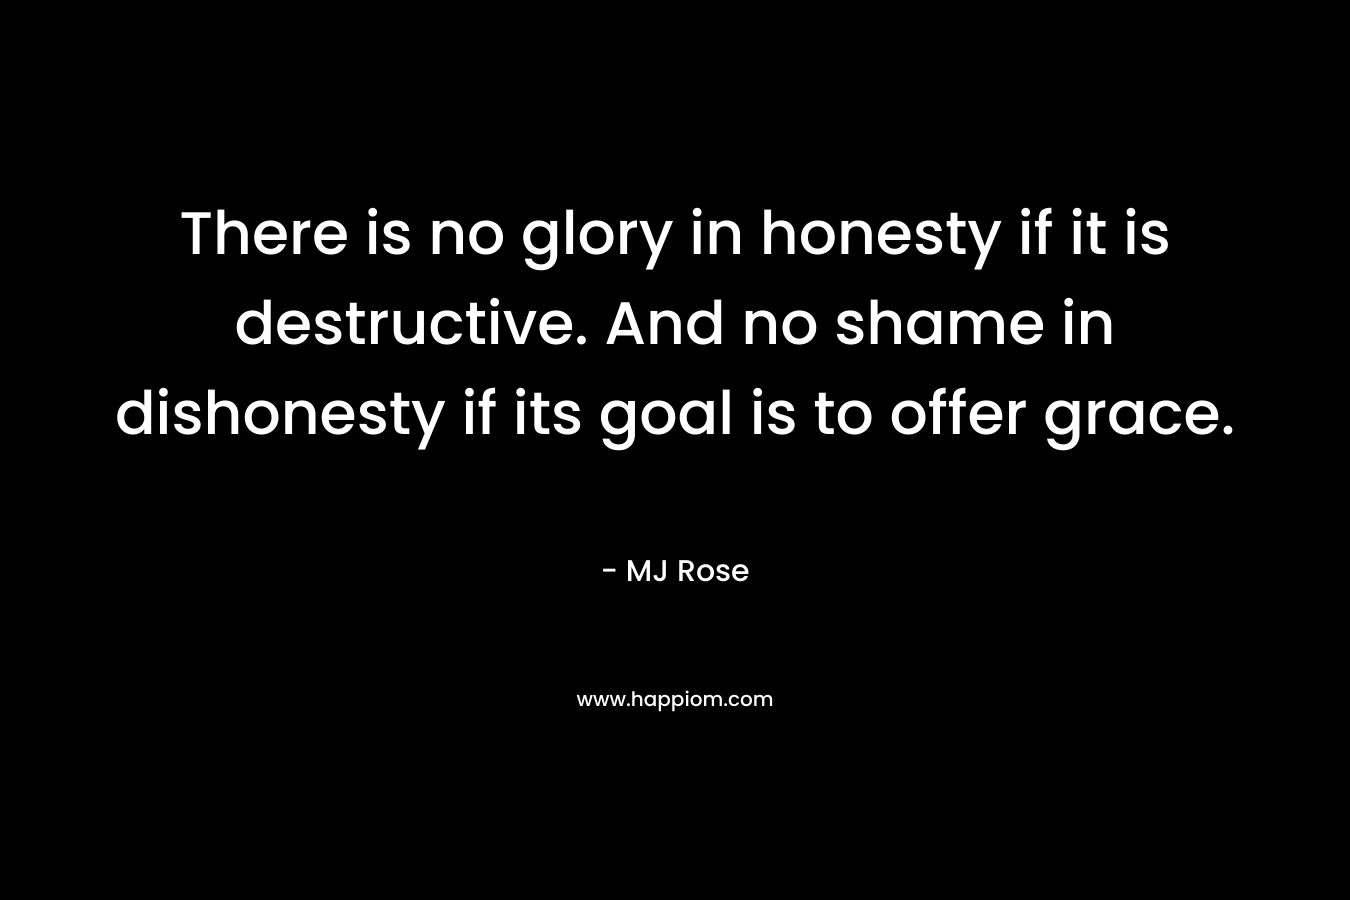 There is no glory in honesty if it is destructive. And no shame in dishonesty if its goal is to offer grace.